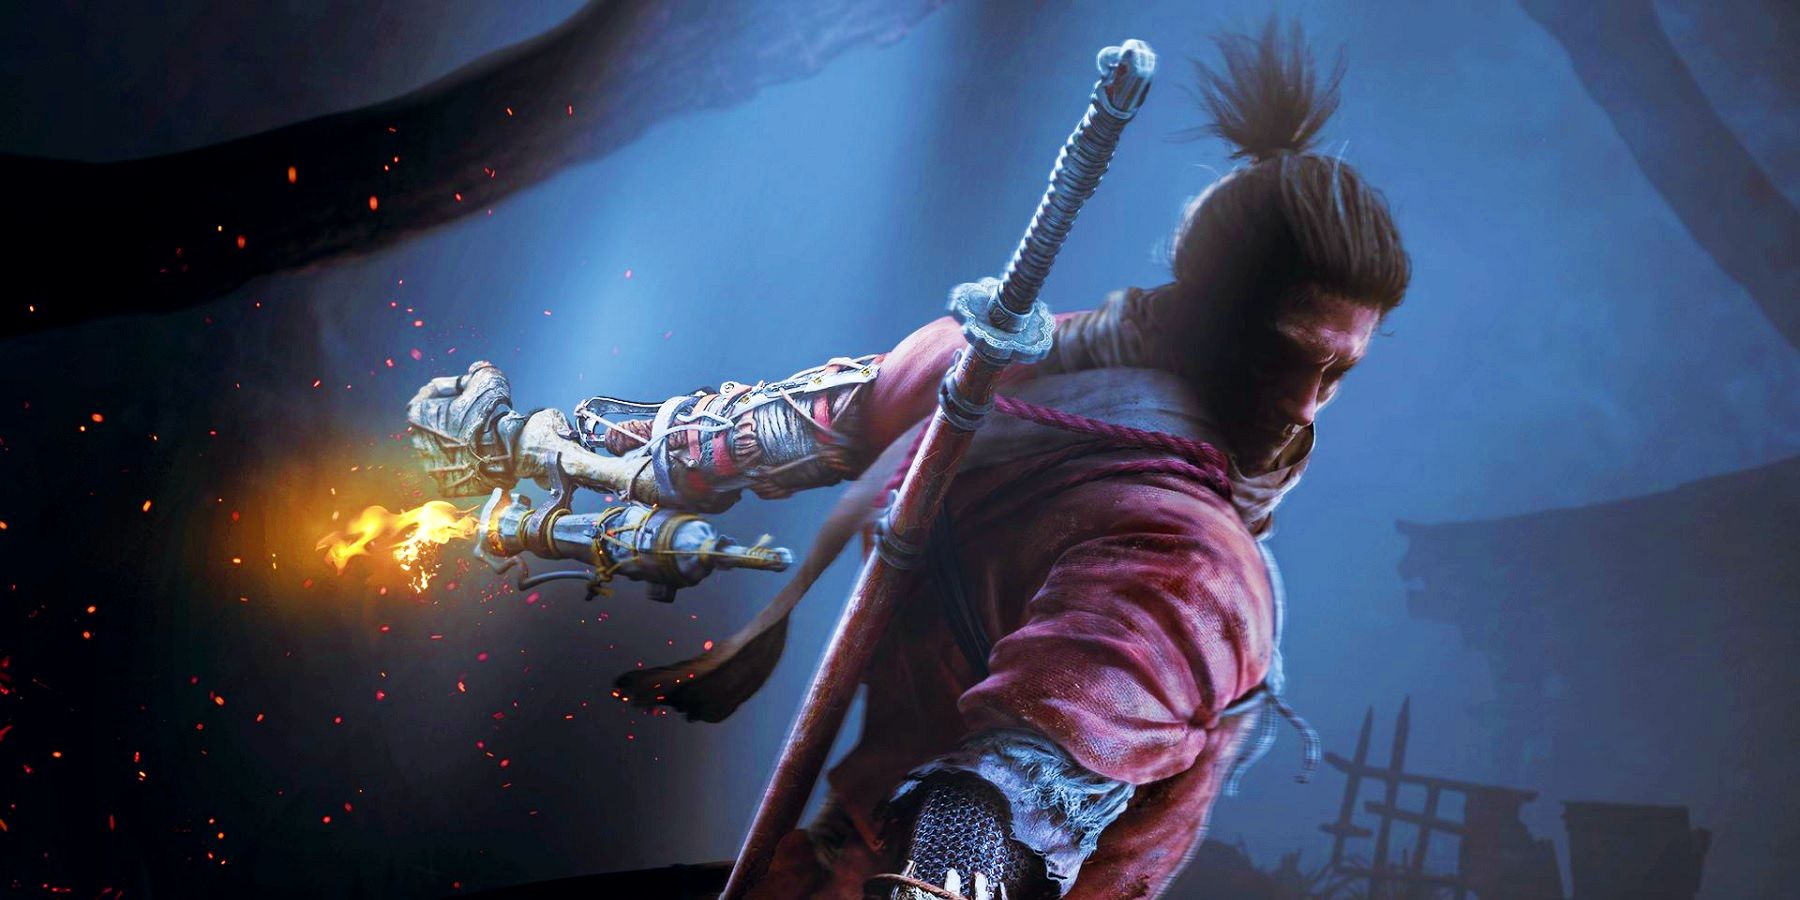 sekiro-shadows-die-twice-adding-new-social-feature-gauntlet-challenges